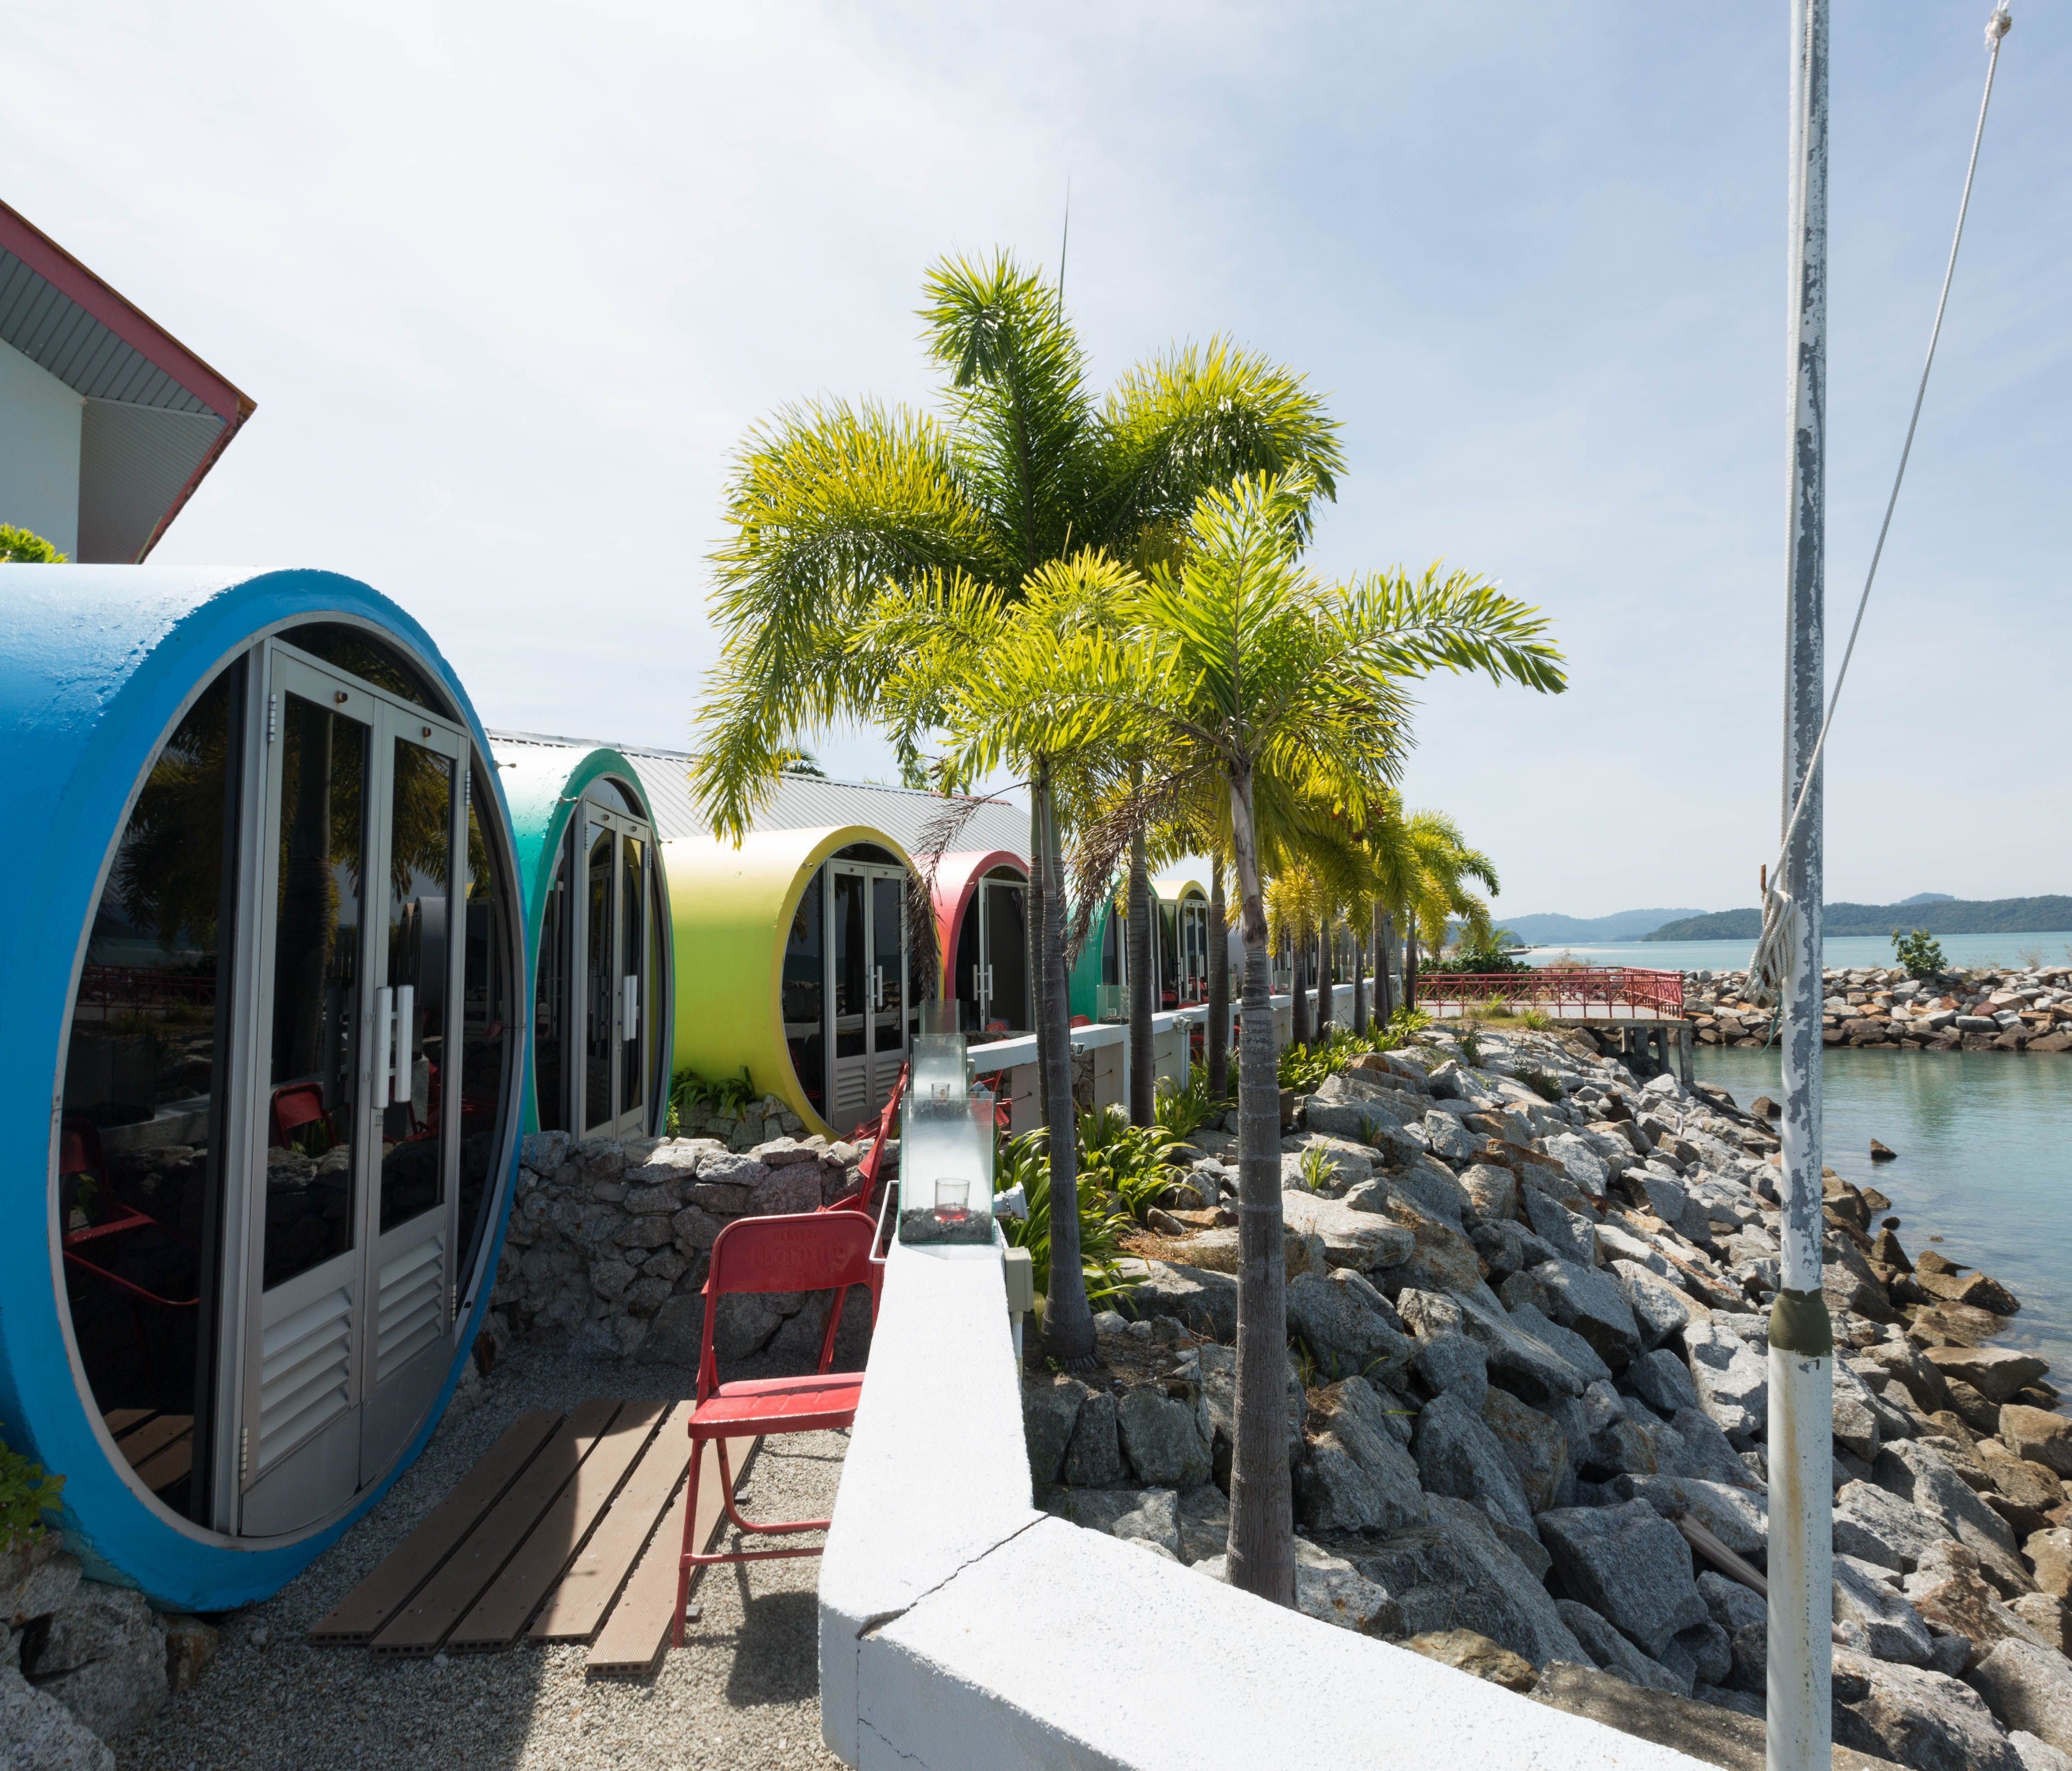 Tubotel, Langkawi, Malaysia: For a quirky, budget stay in Malaysia, Tubotel is a fun, intimate property with just 17 rooms housed in repurposed concrete tubes. There's a restaurant with a waterfront terrace and a bar on the property — guests can enjo